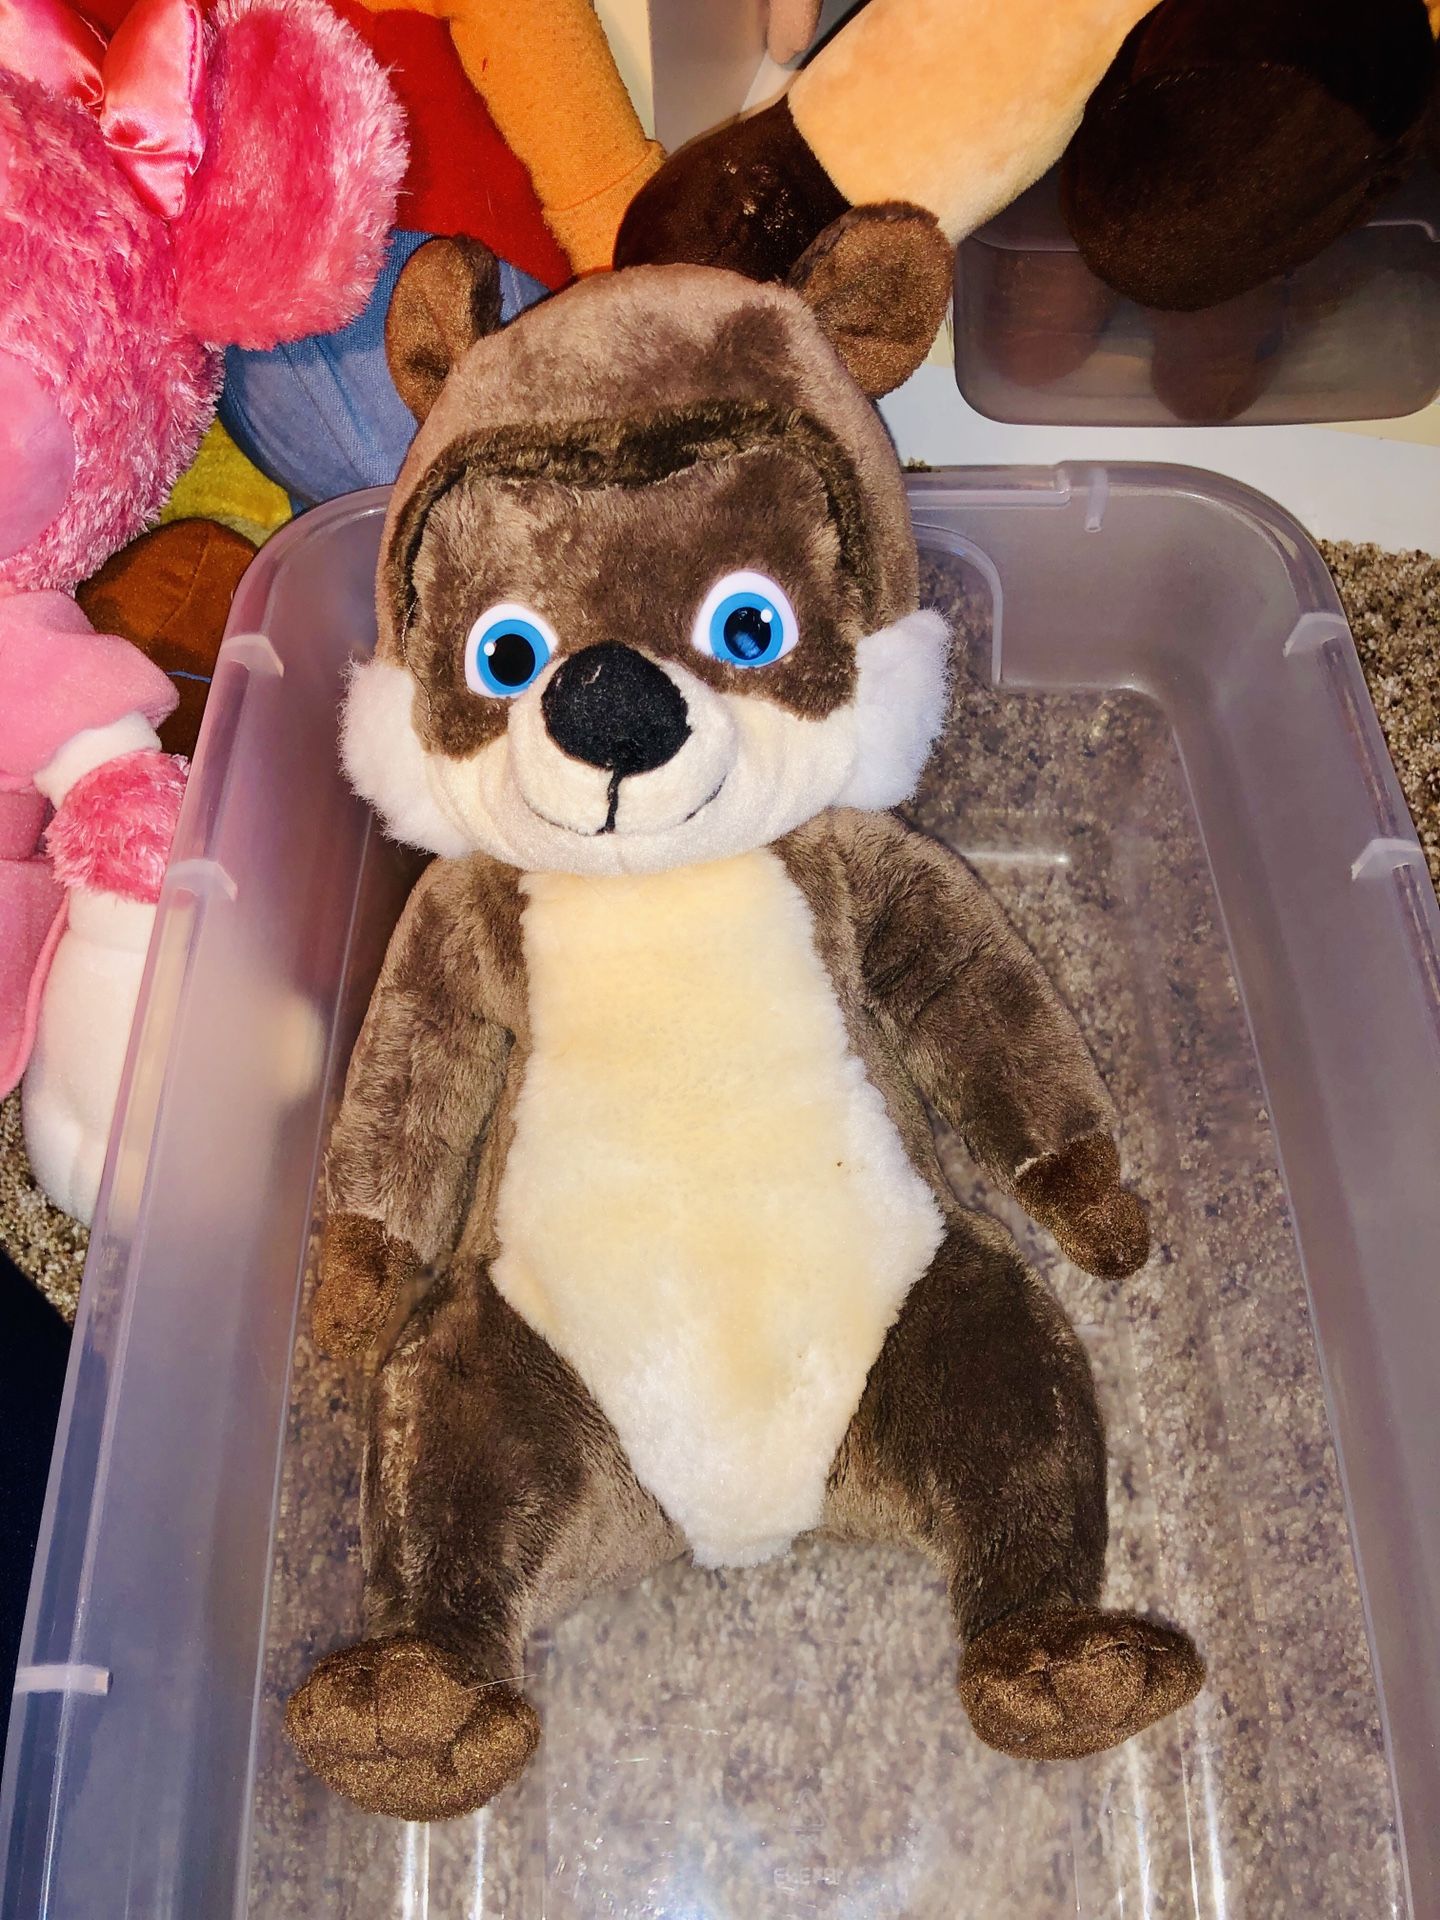 Over the Hedge plush doll toy - RJ - Bruce Willis voiced this character in movie